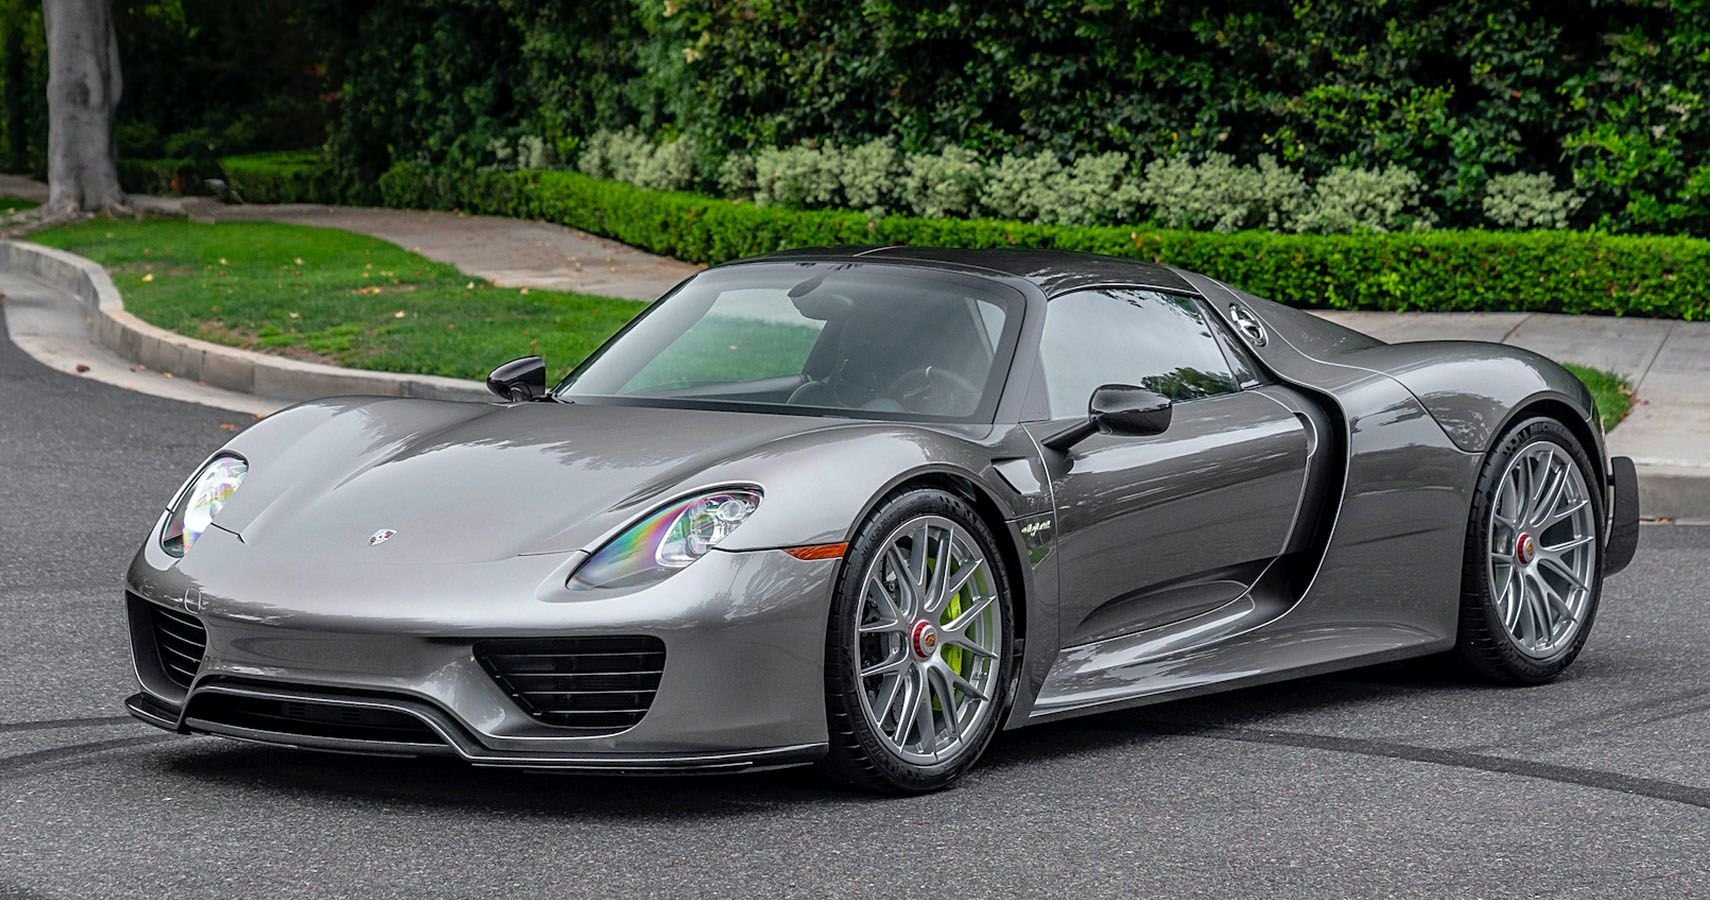 High Mileage? 4770-Mile Porsche 918 Spyder With Weissach Package Pops Up For Sale